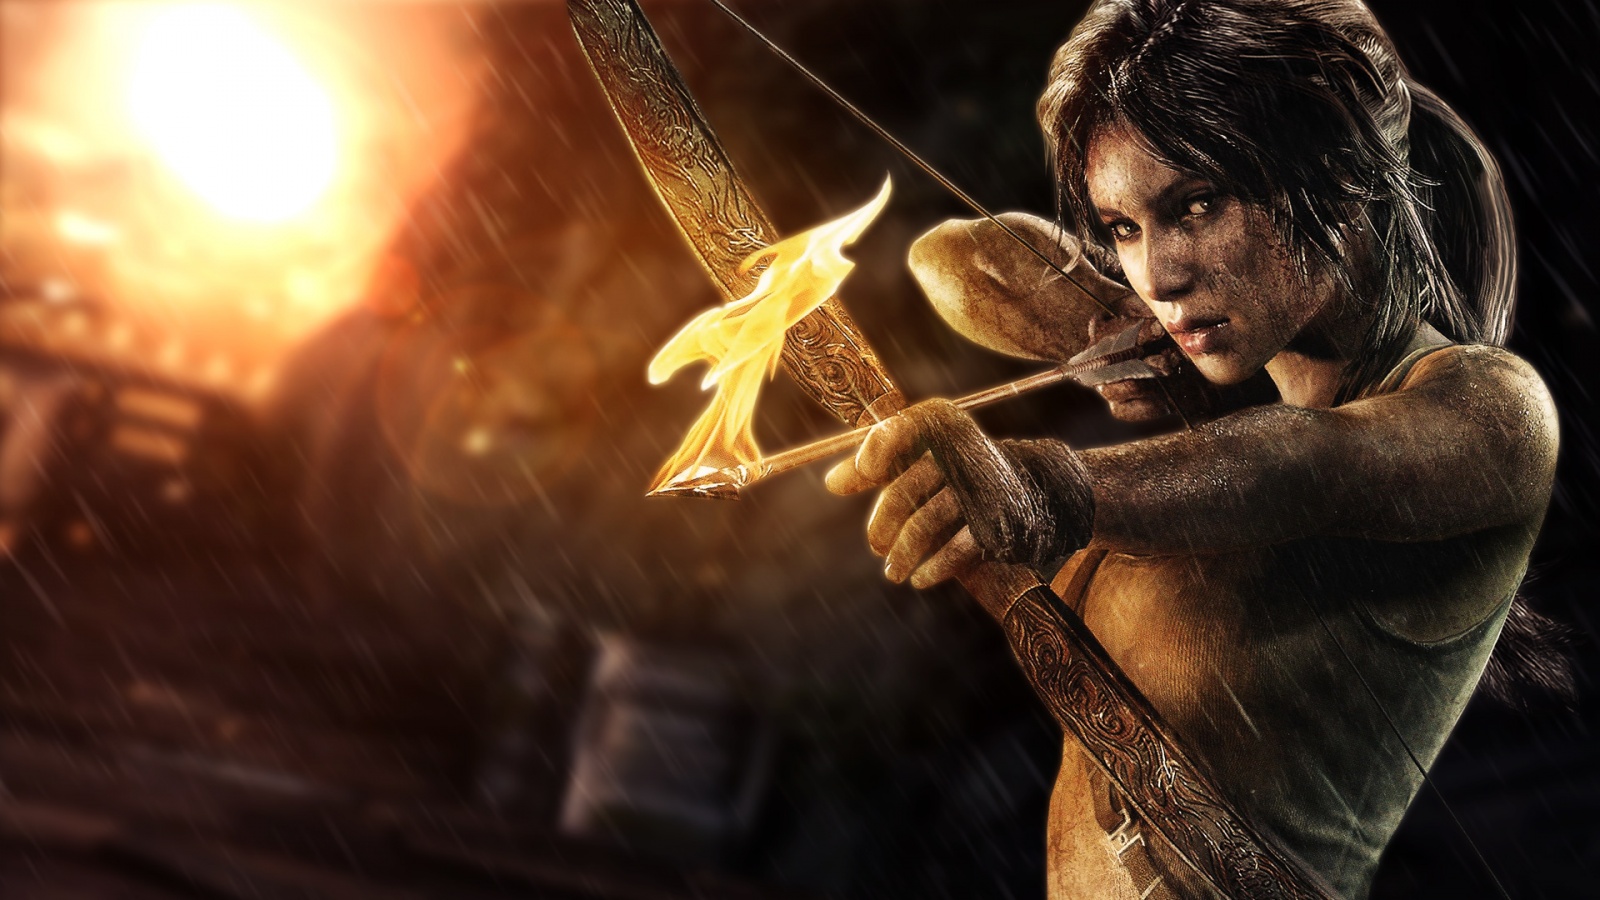 “Tomb Raider” Not So Exclusive After All - Lara Croft Makes Her Way to Other Platforms at a Later Date